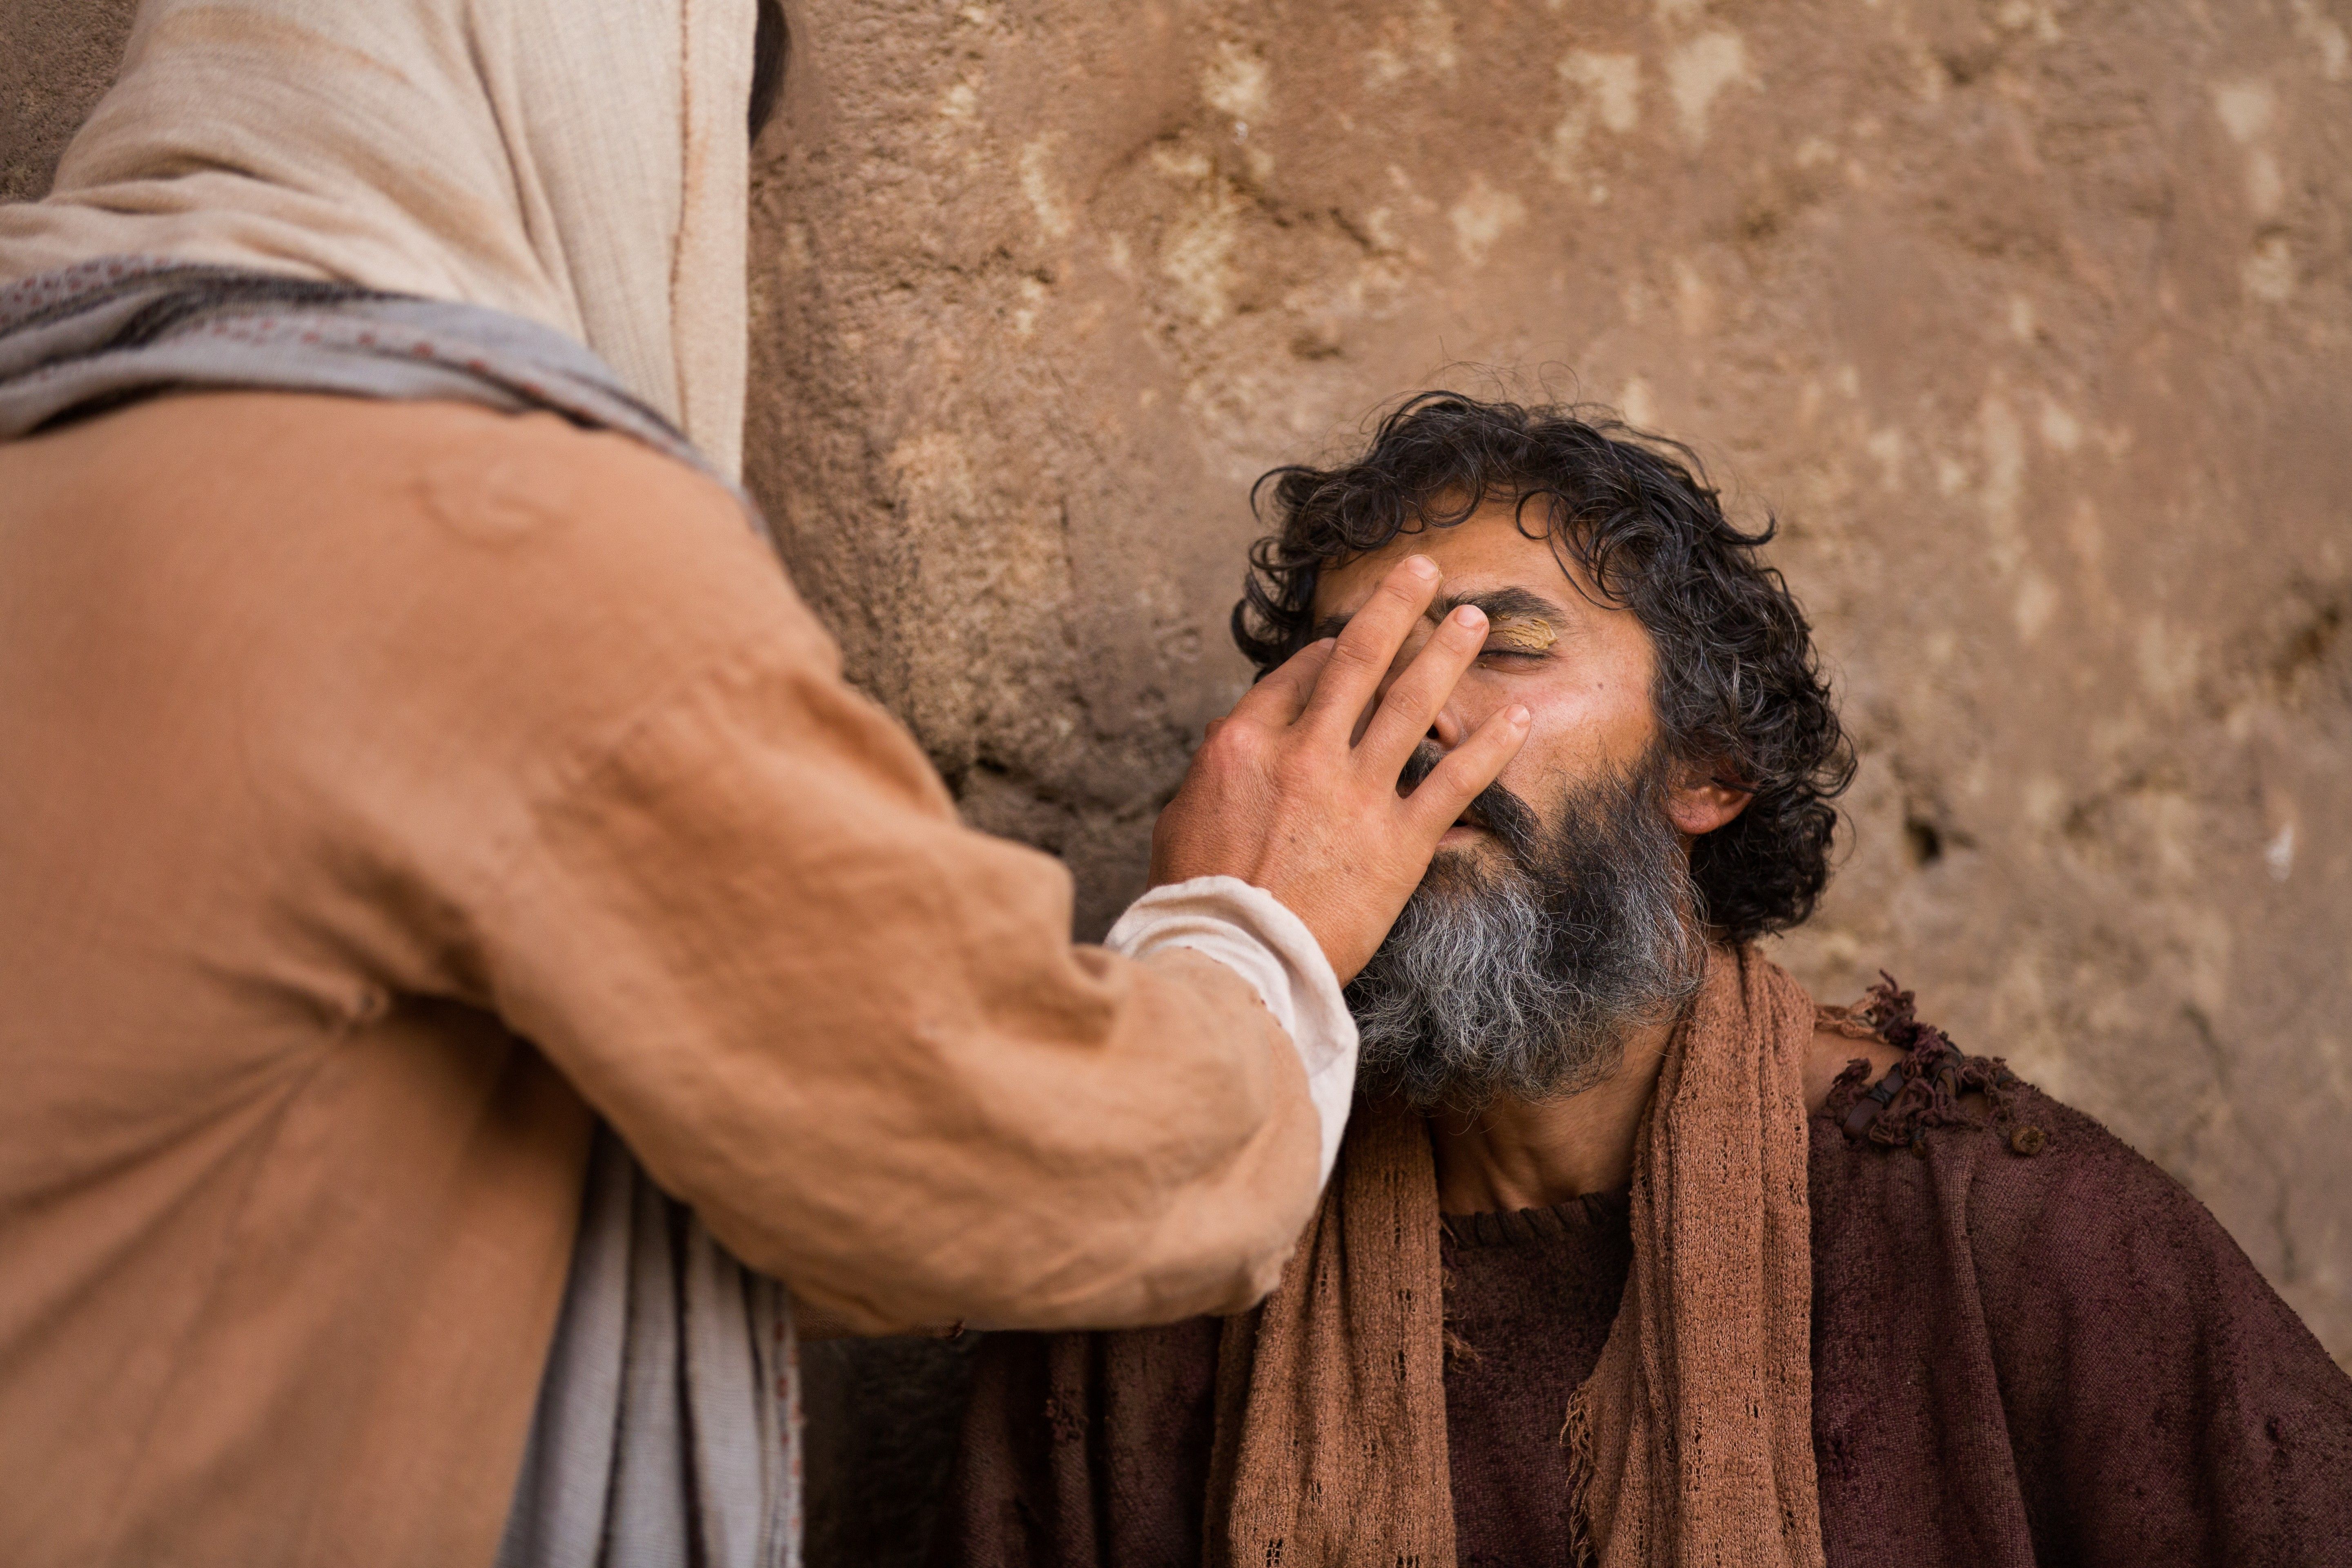 Christ heals the blind man by putting clay on his eyes.